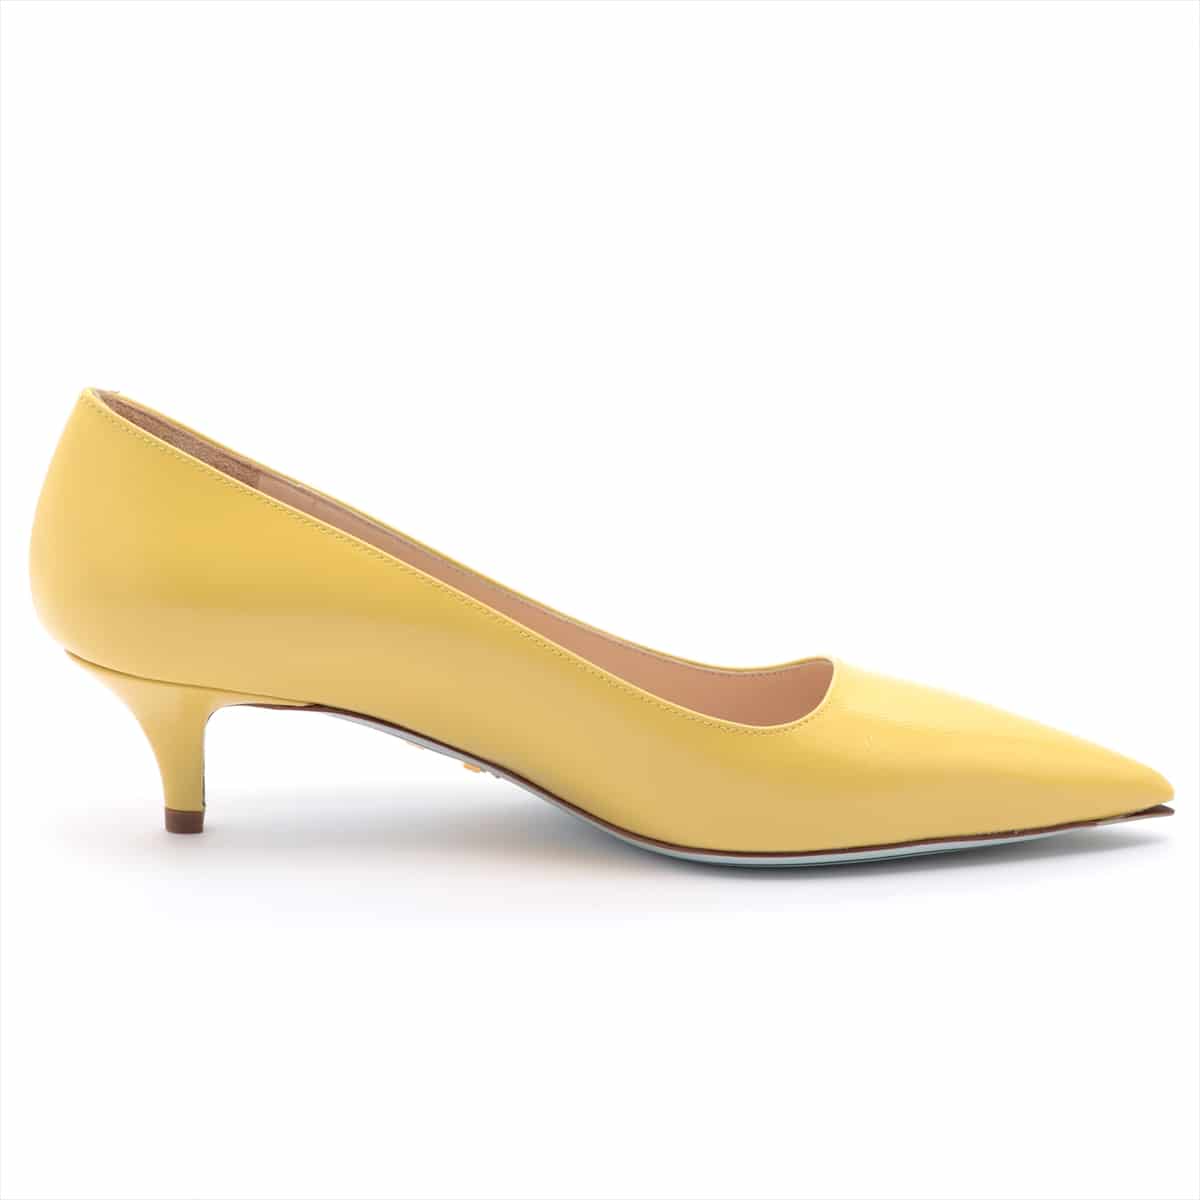 Prada Leather Pumps 36.5 Ladies' Yellow Initial metal fittings on the outsole